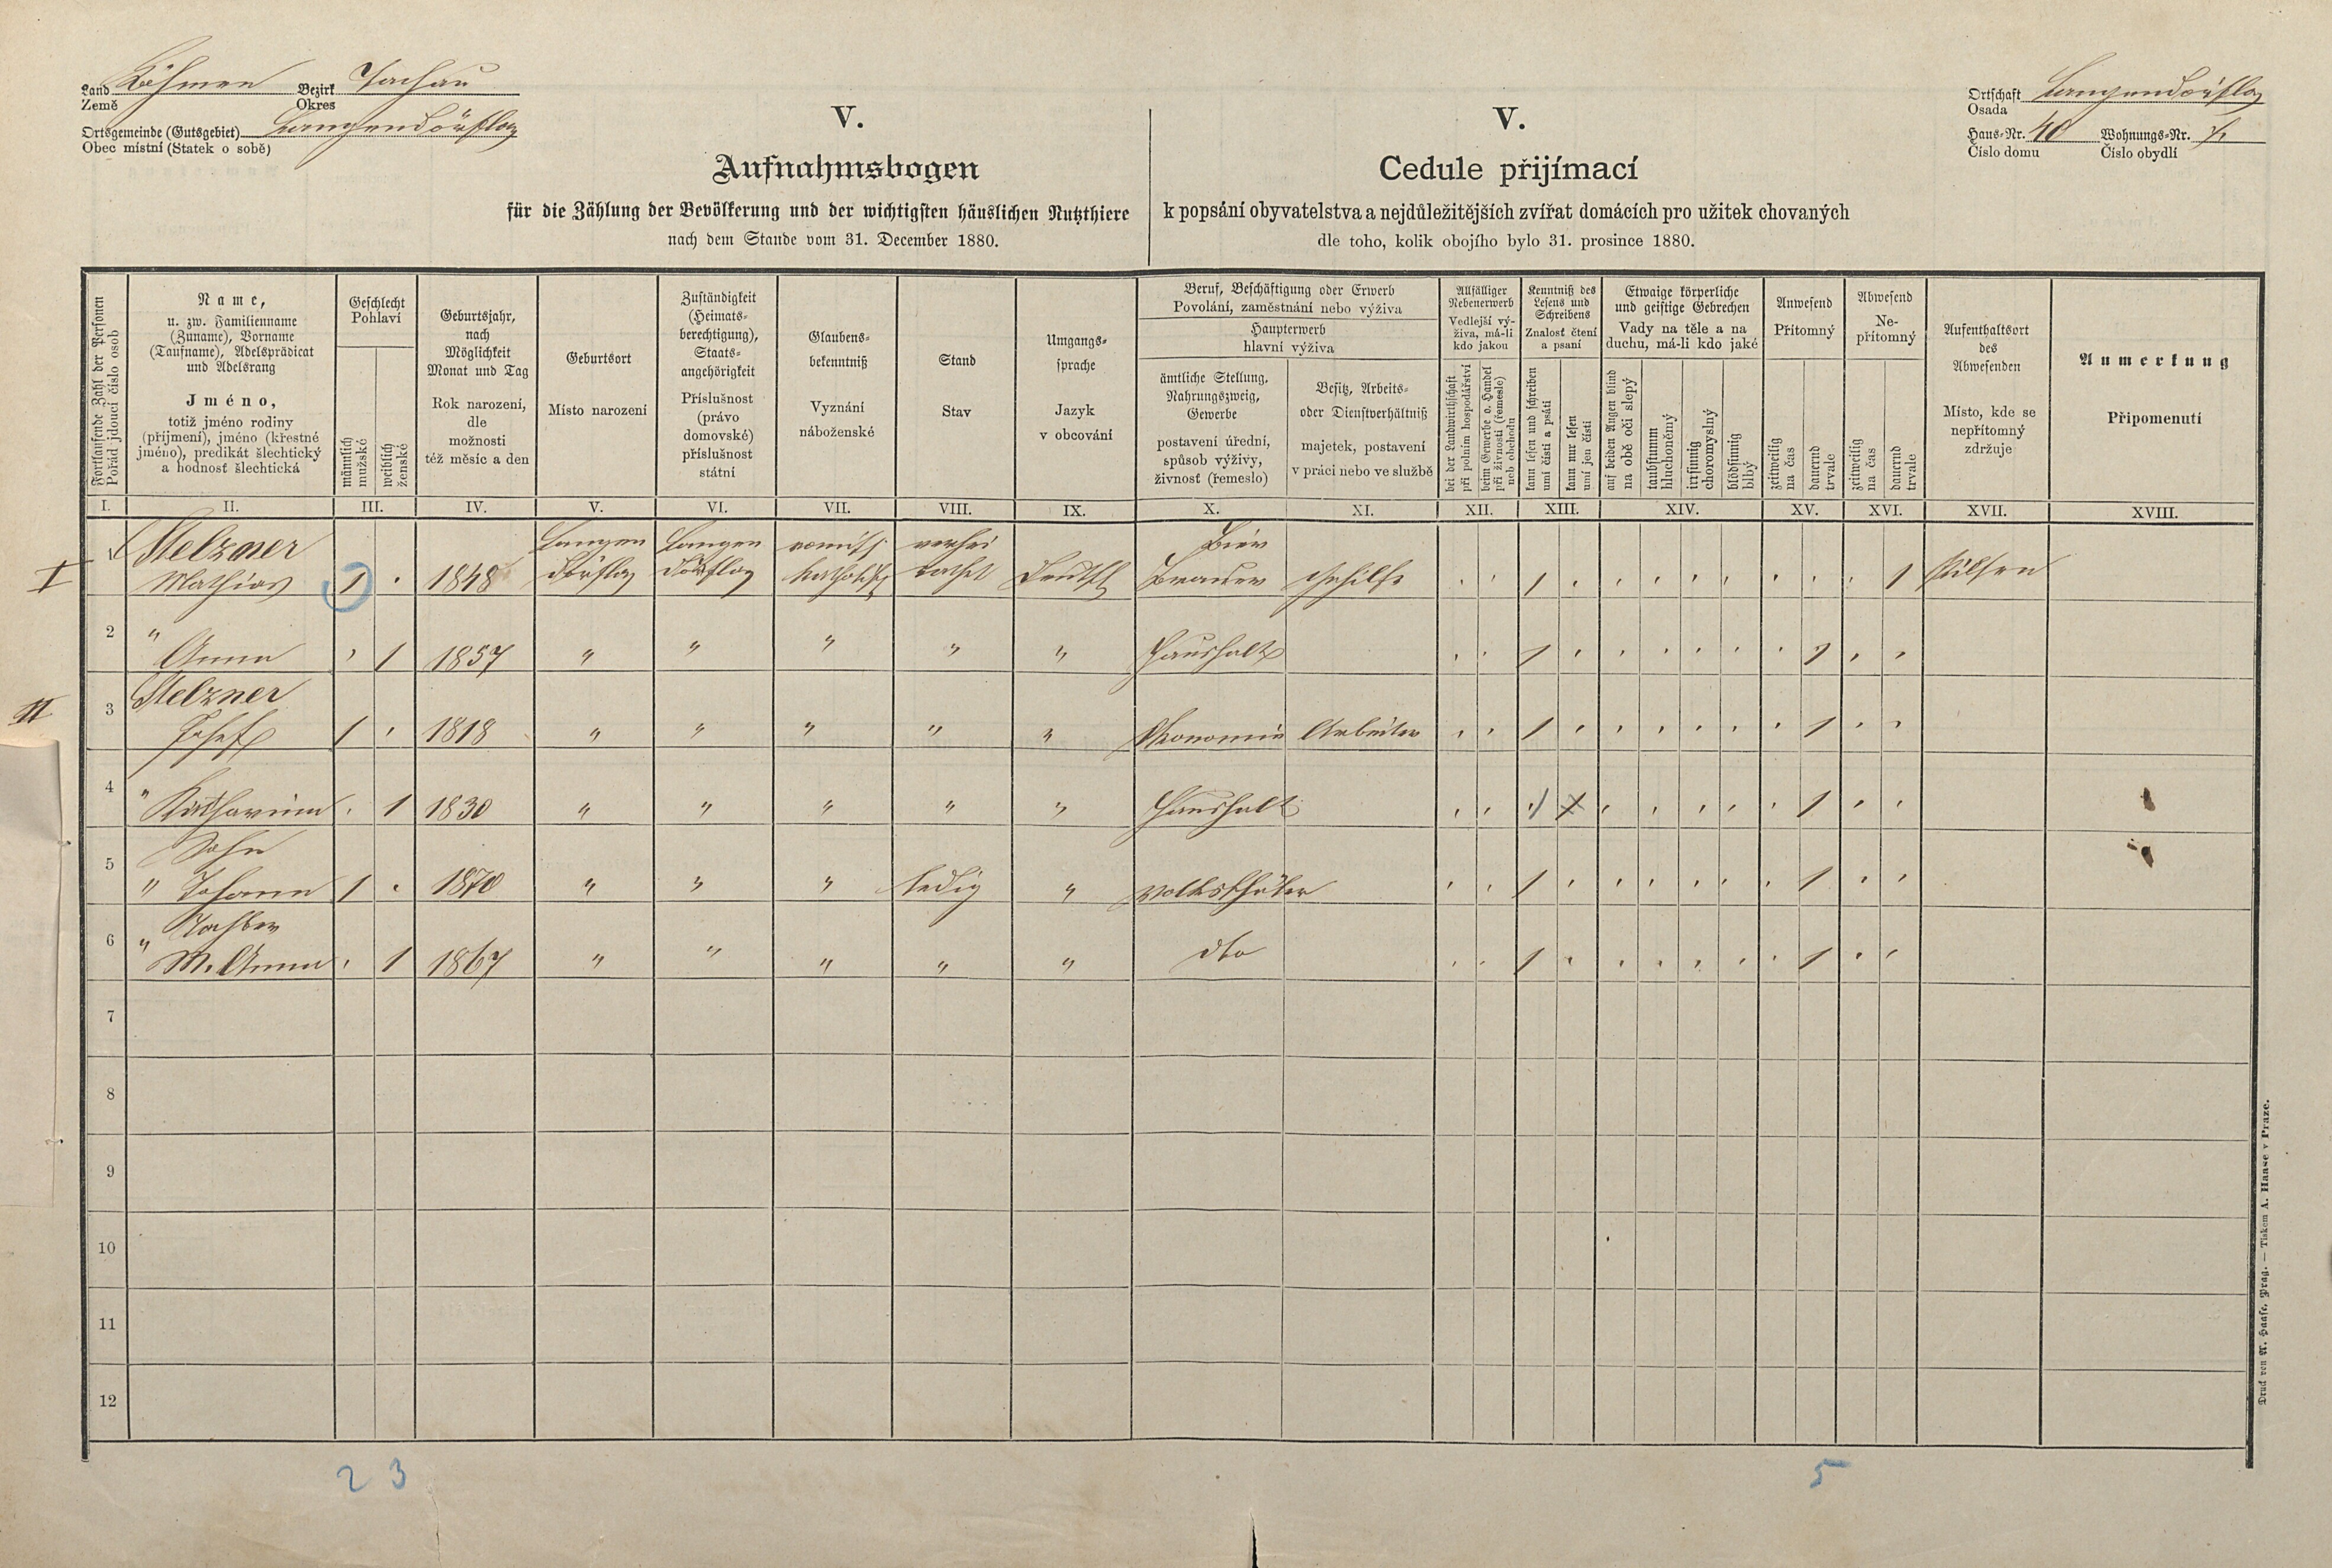 1. soap-tc_00192_census-1880-dlouhy-ujezd-cp040_0010